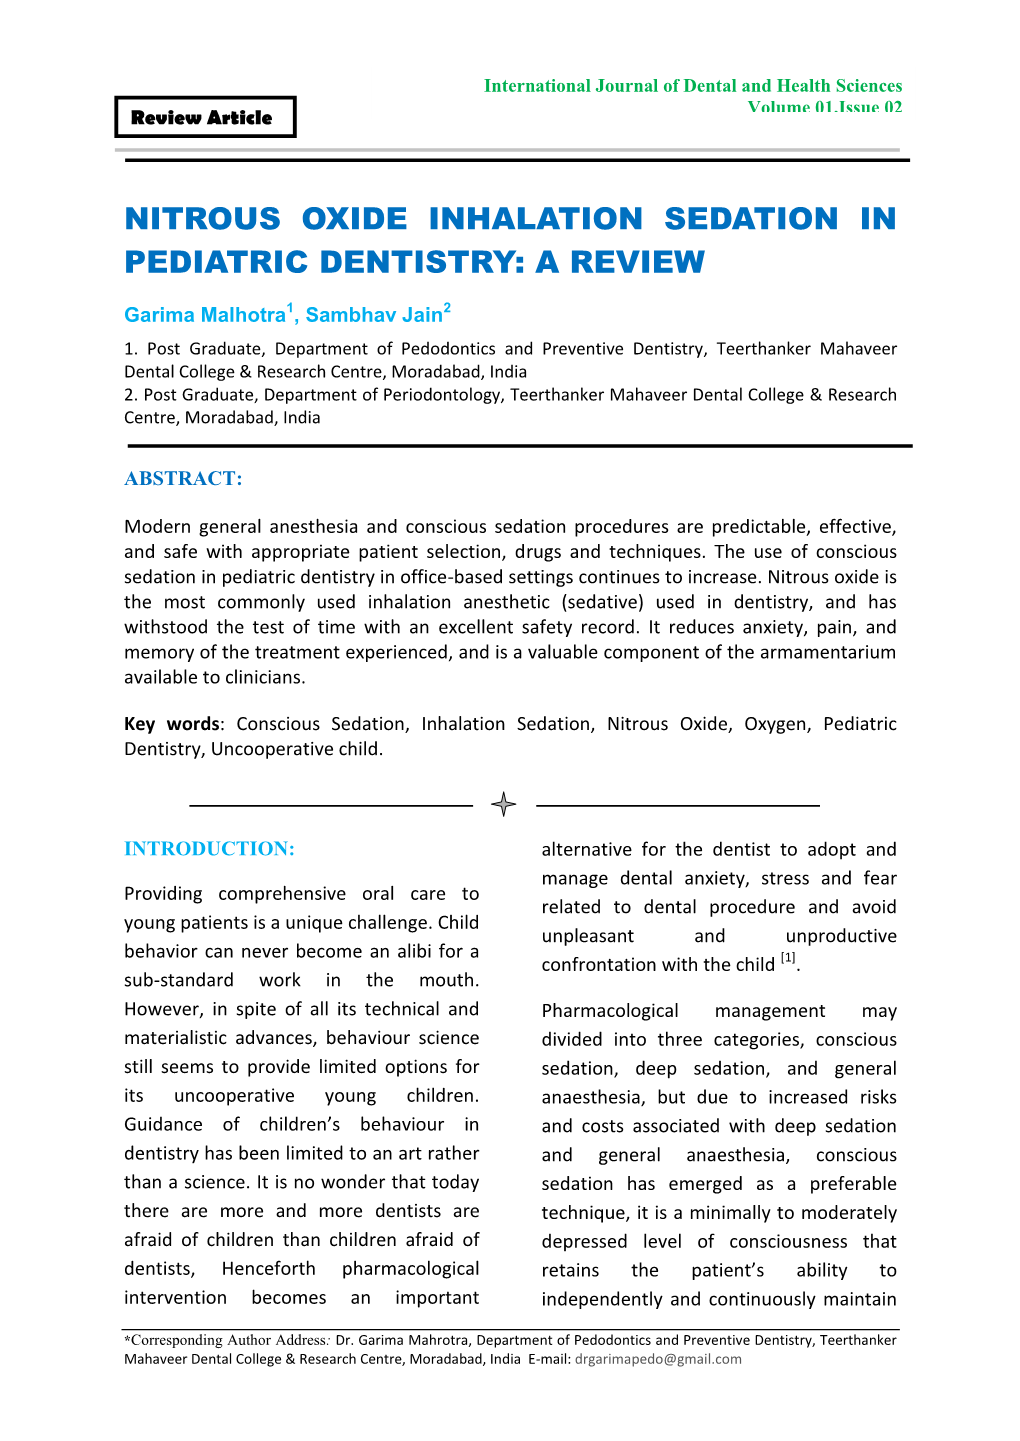 Nitrous Oxide Inhalation Sedation in Pediatric Dentistry: a Review